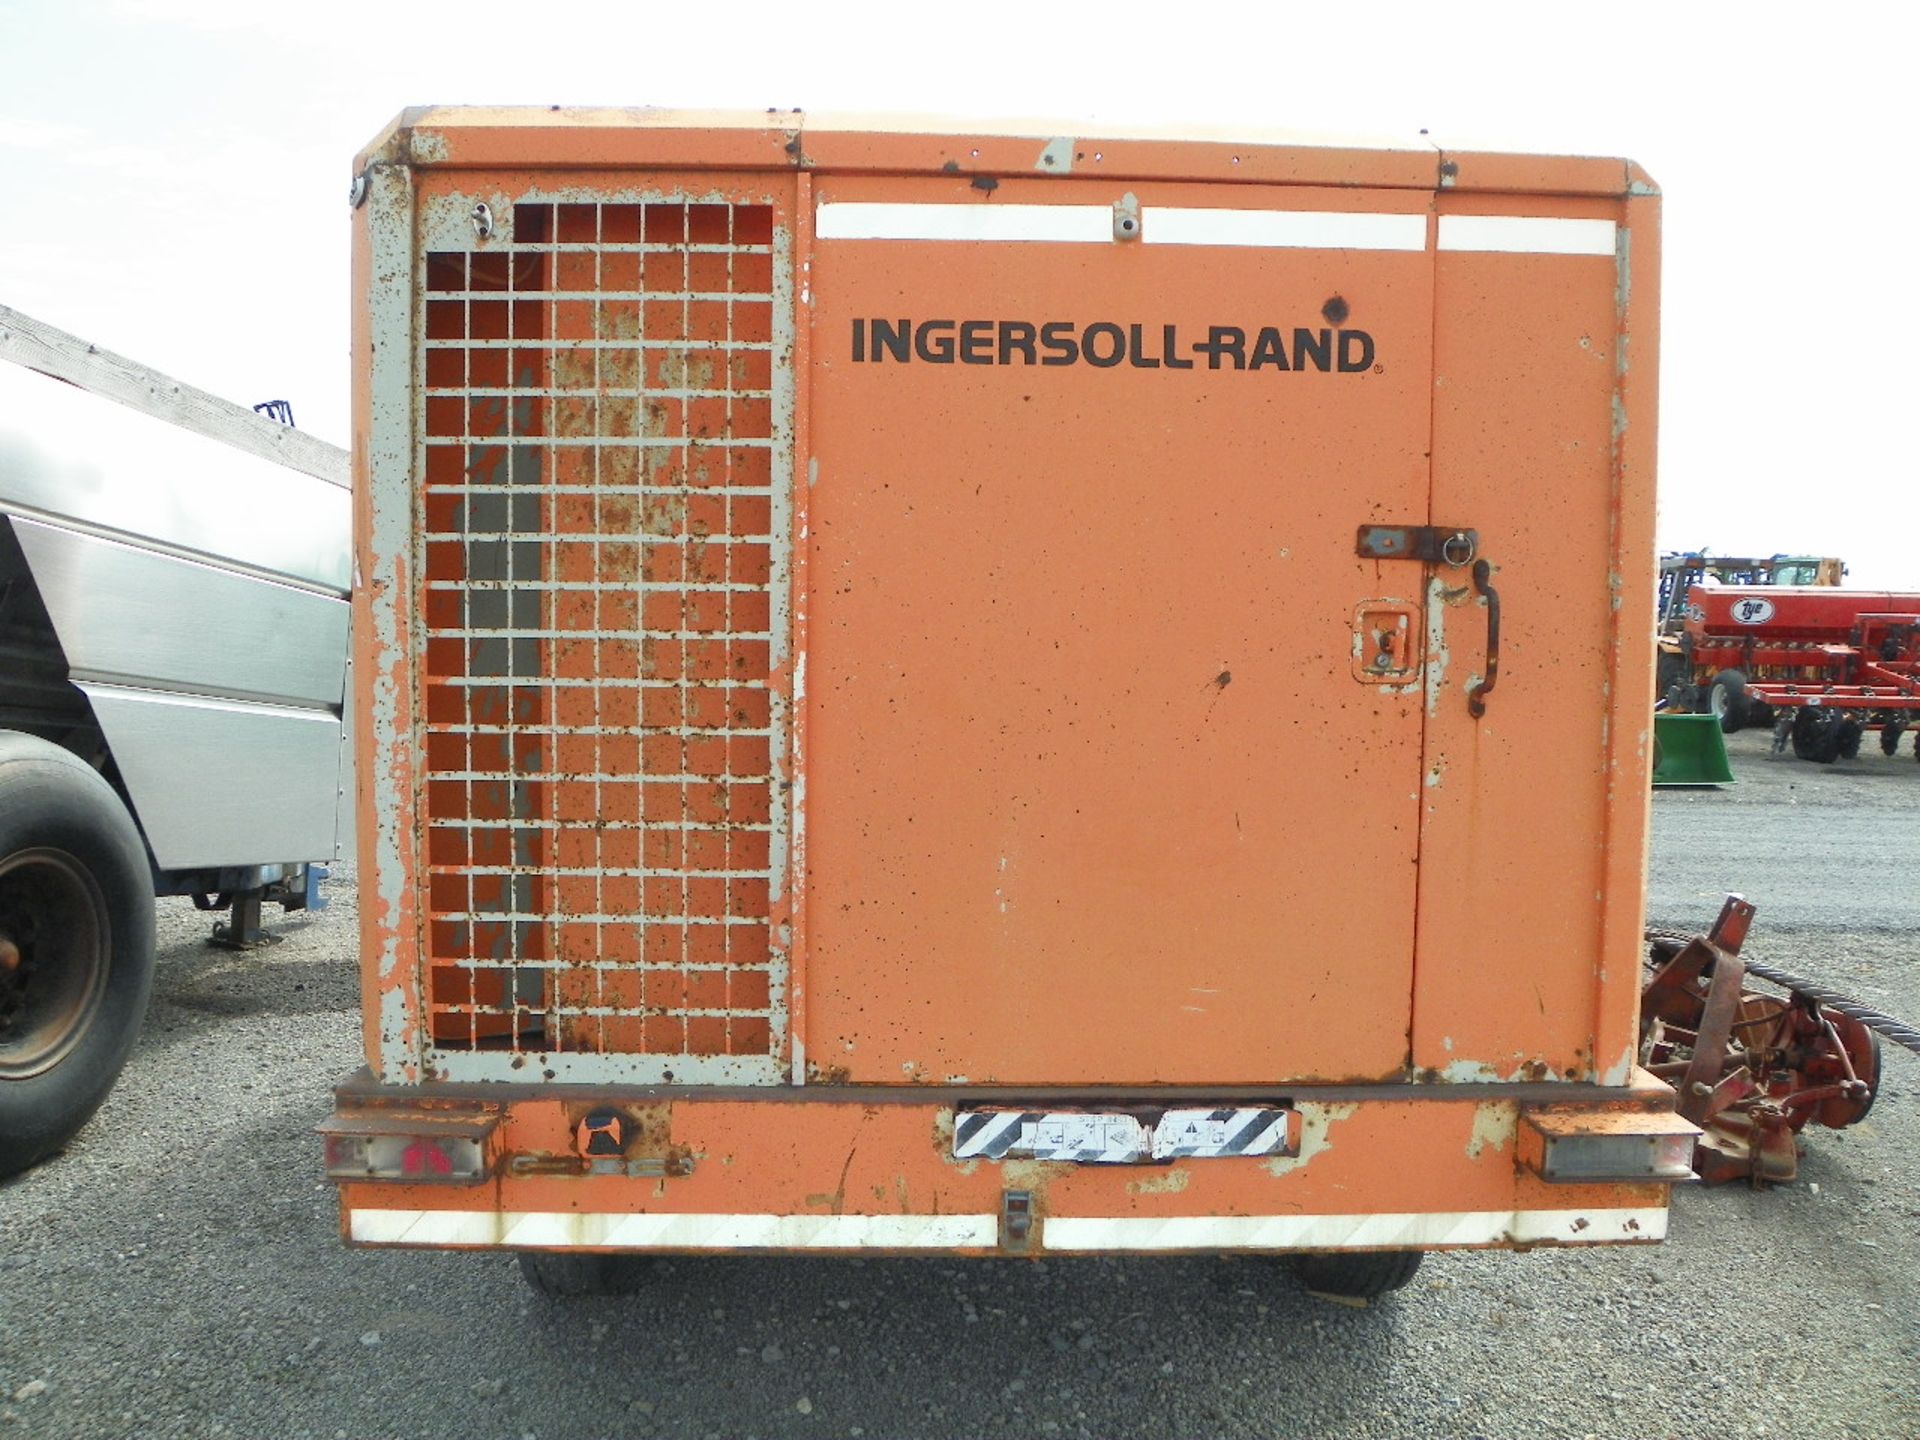 Ingersoll rand air compressor - Image 6 of 8